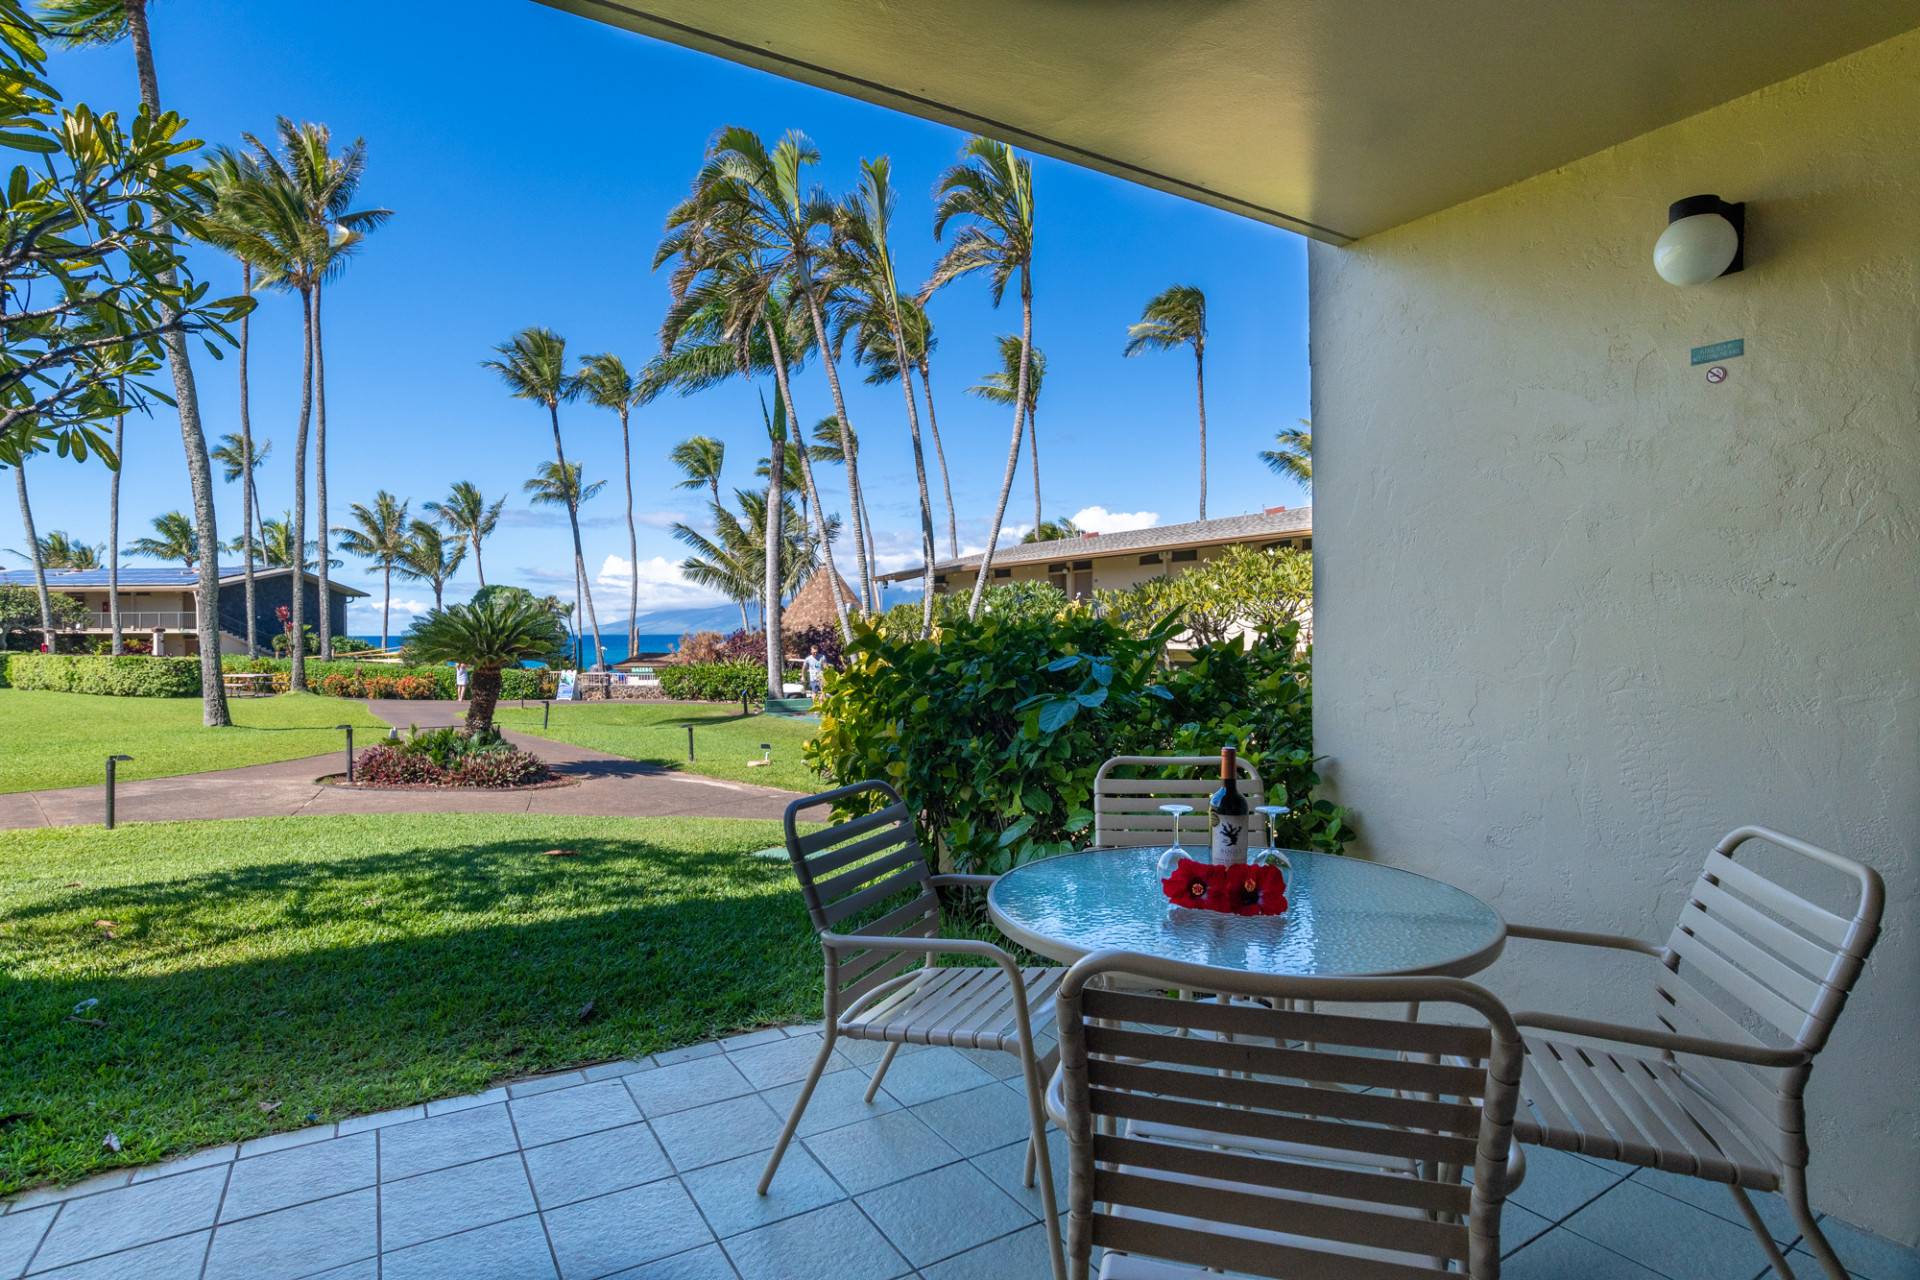 Property Image 1 - Napili Shores B-109 - Ocean View - Napili Bay - enjoy the sand and the surf - Back to School Special